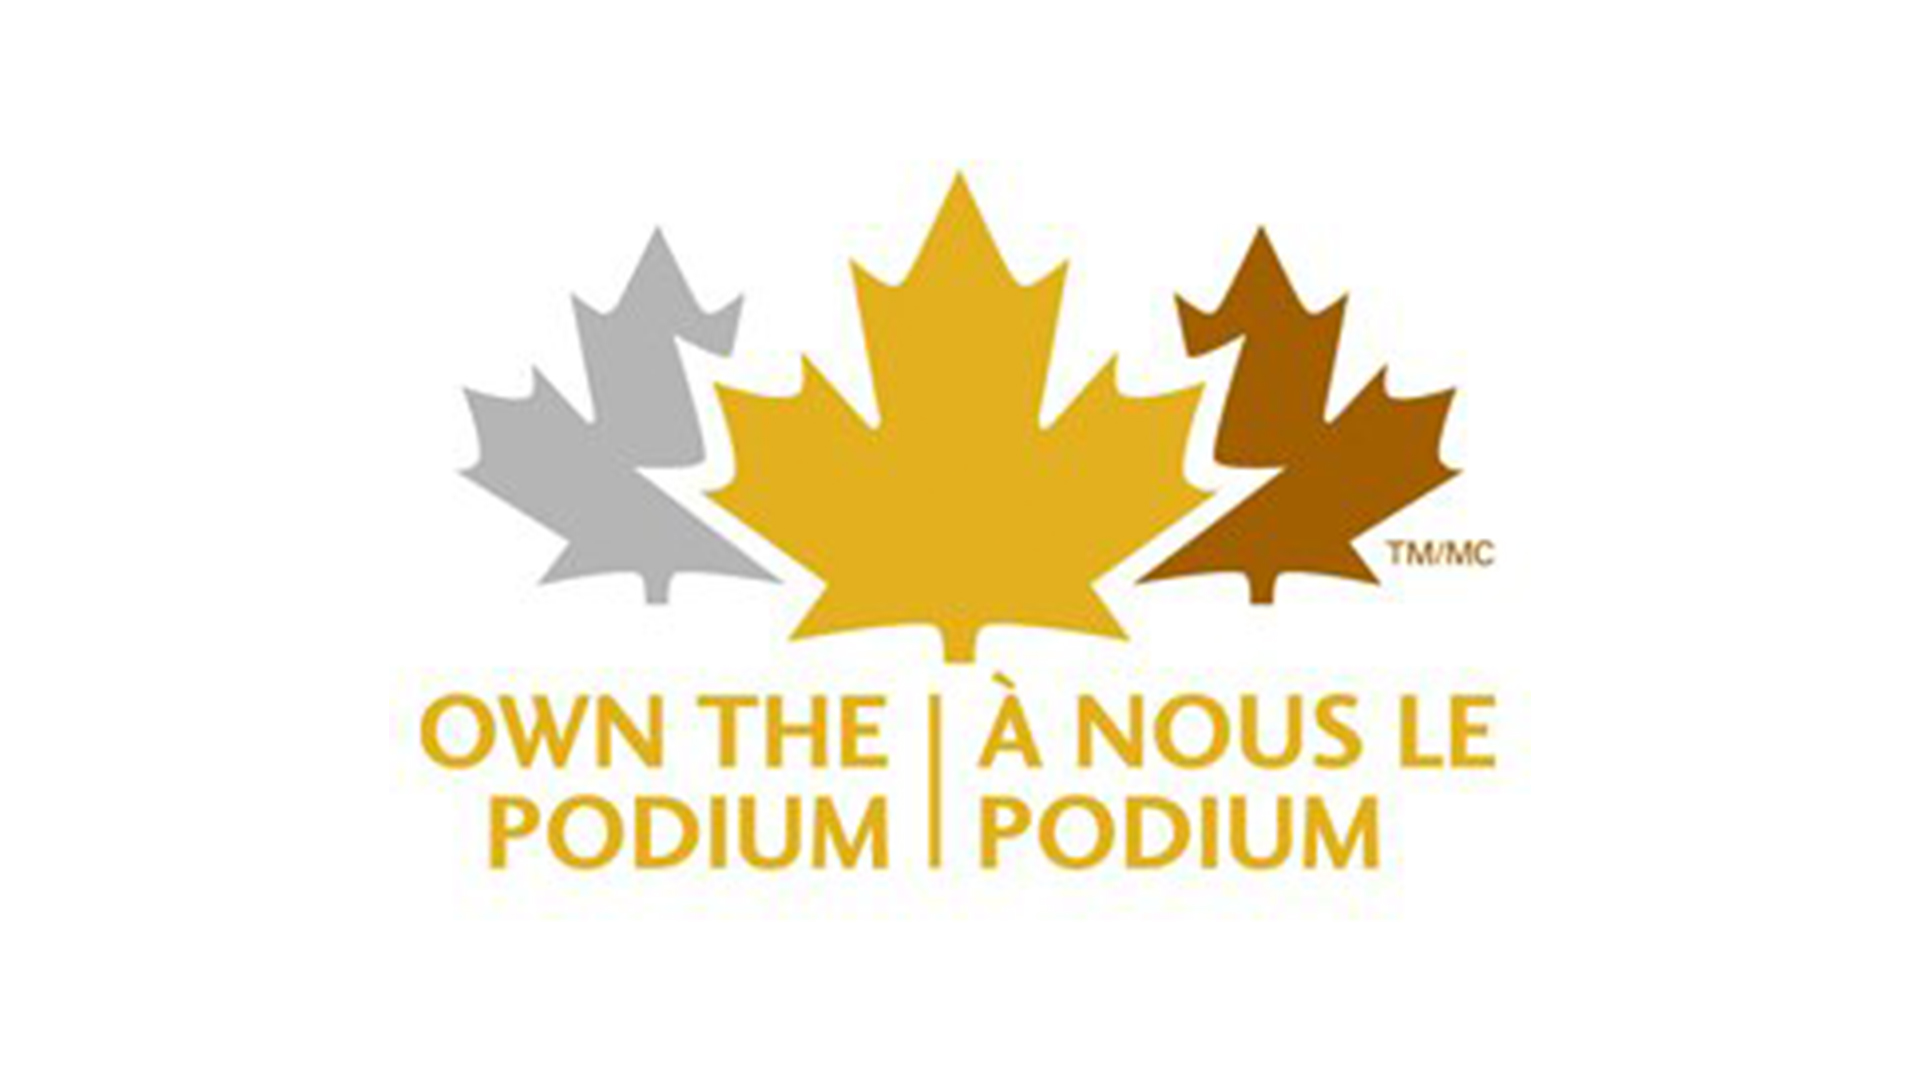 Own the Podium Logo: 3 Canadian Maple Leaves